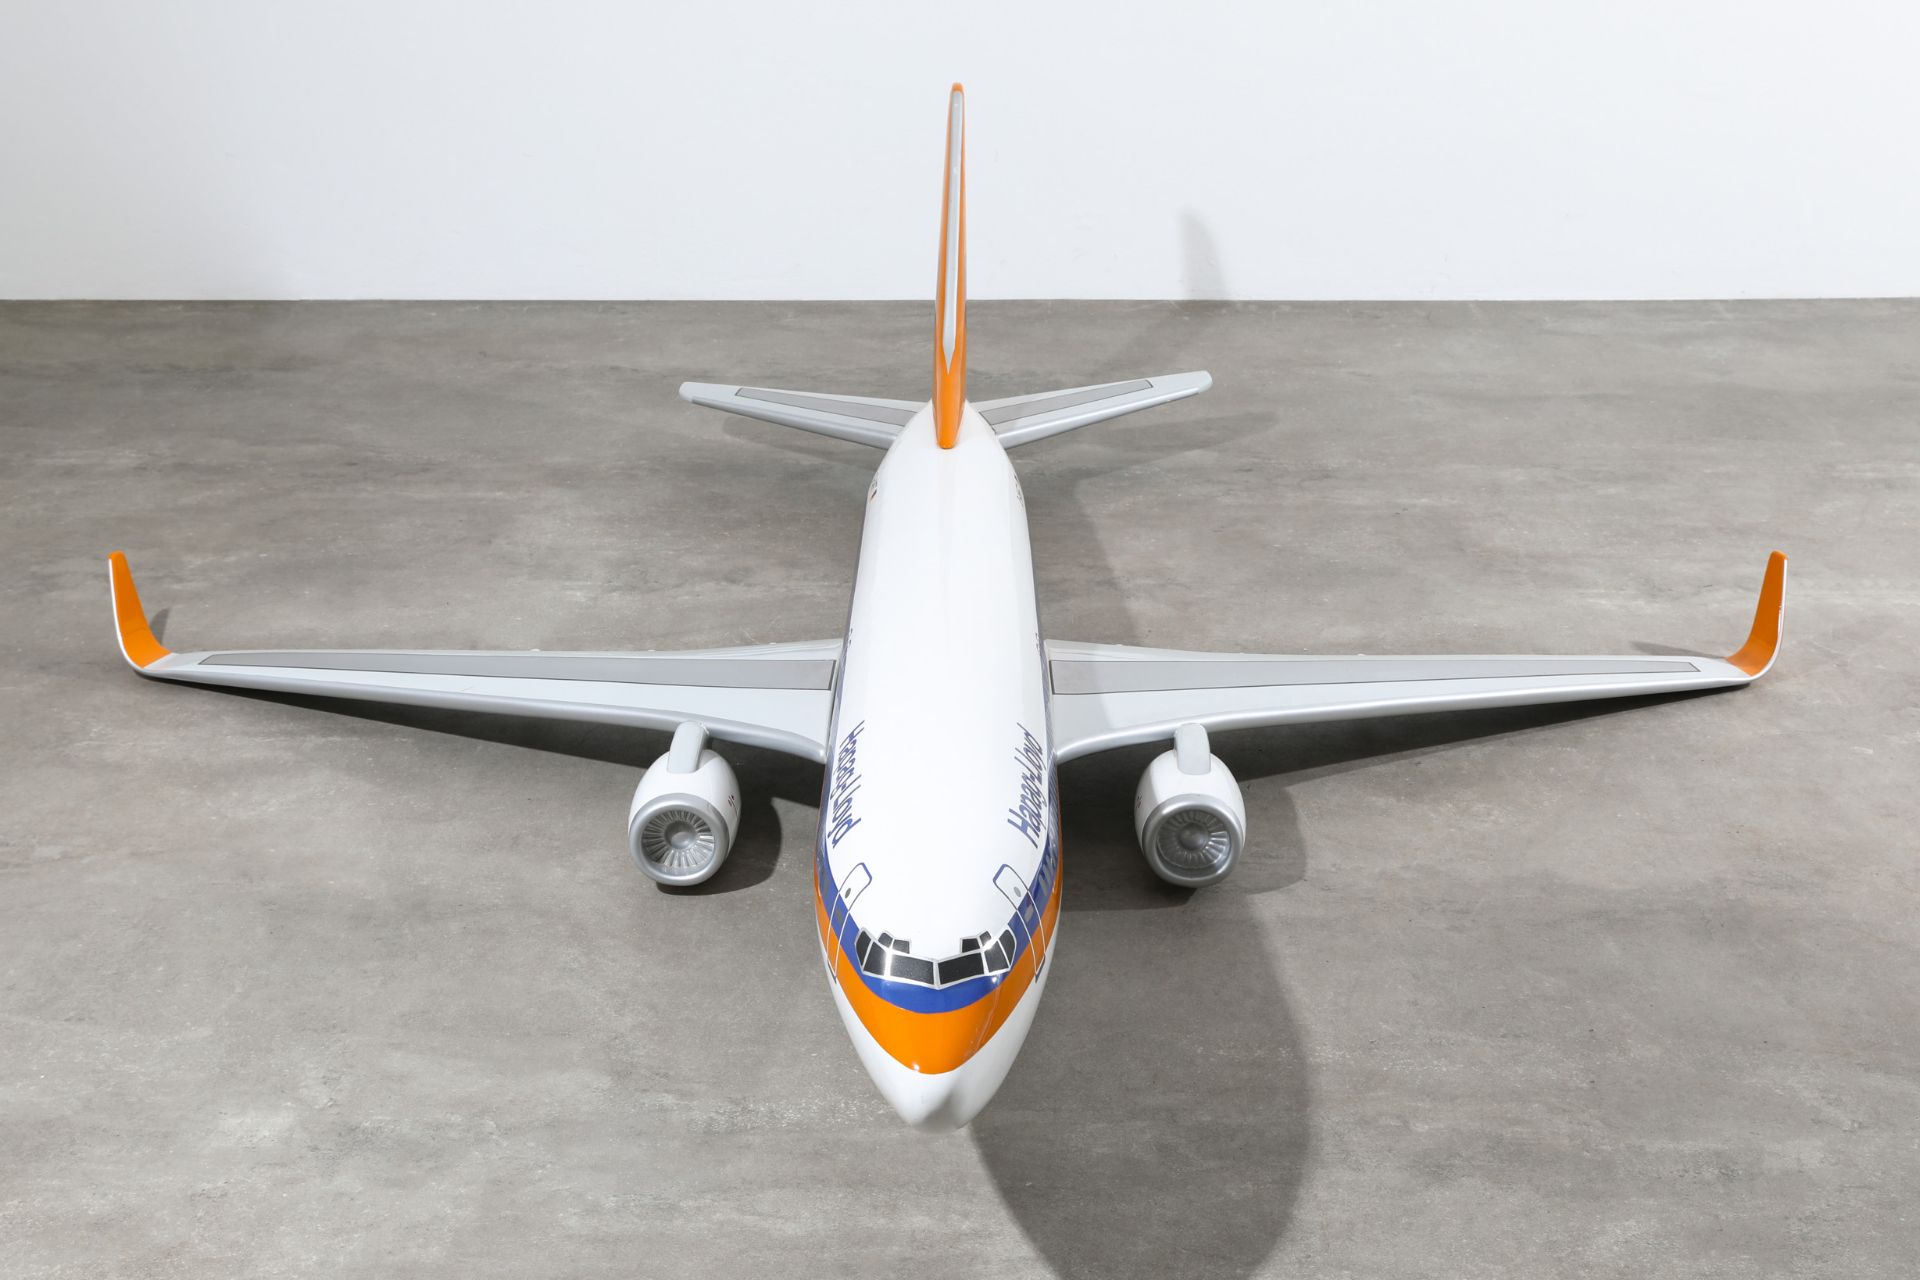 Hapag Lloyd, Boeing 737, large aircraft model, scale 1:12 - Image 3 of 5